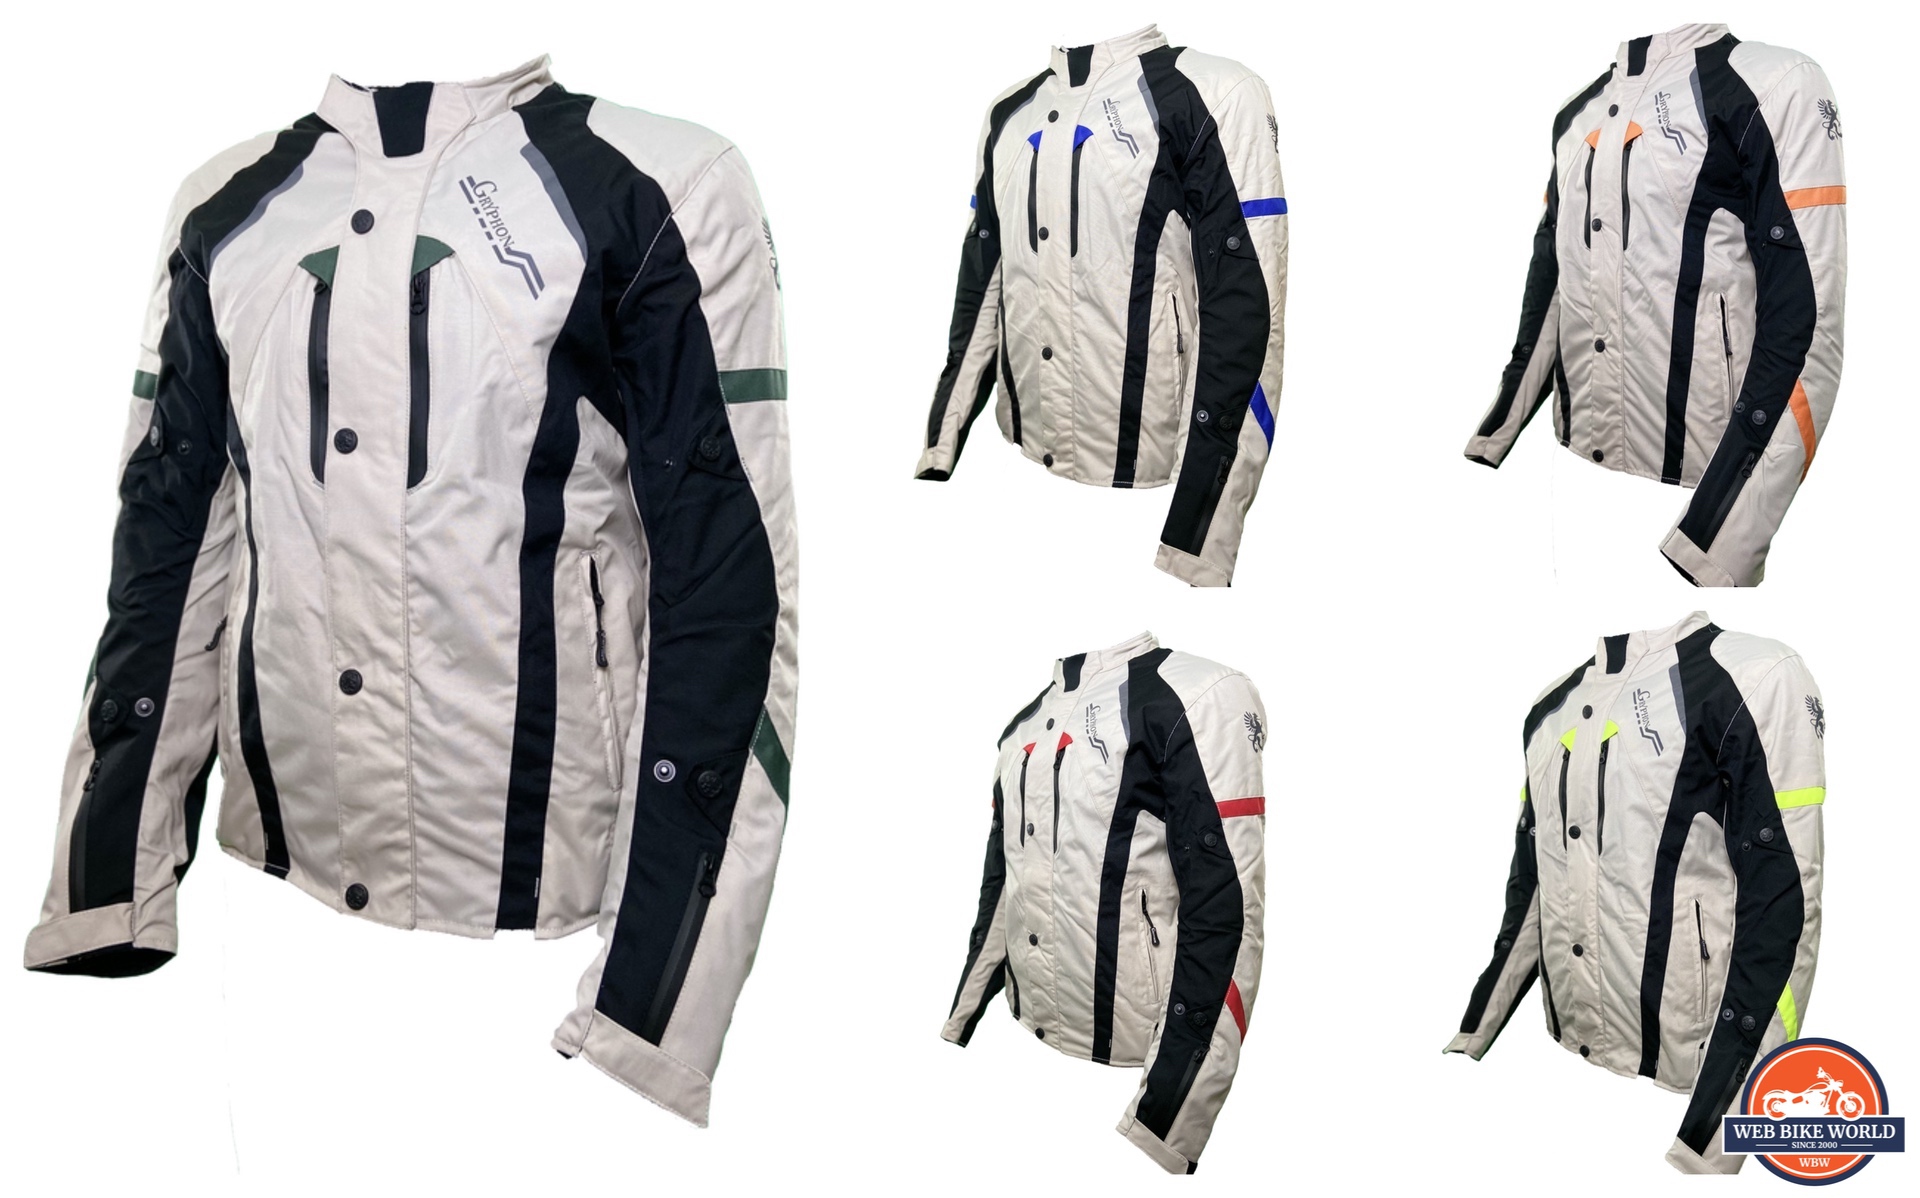 Different colorways for Gryphon Moto Blue Ridge Jacket